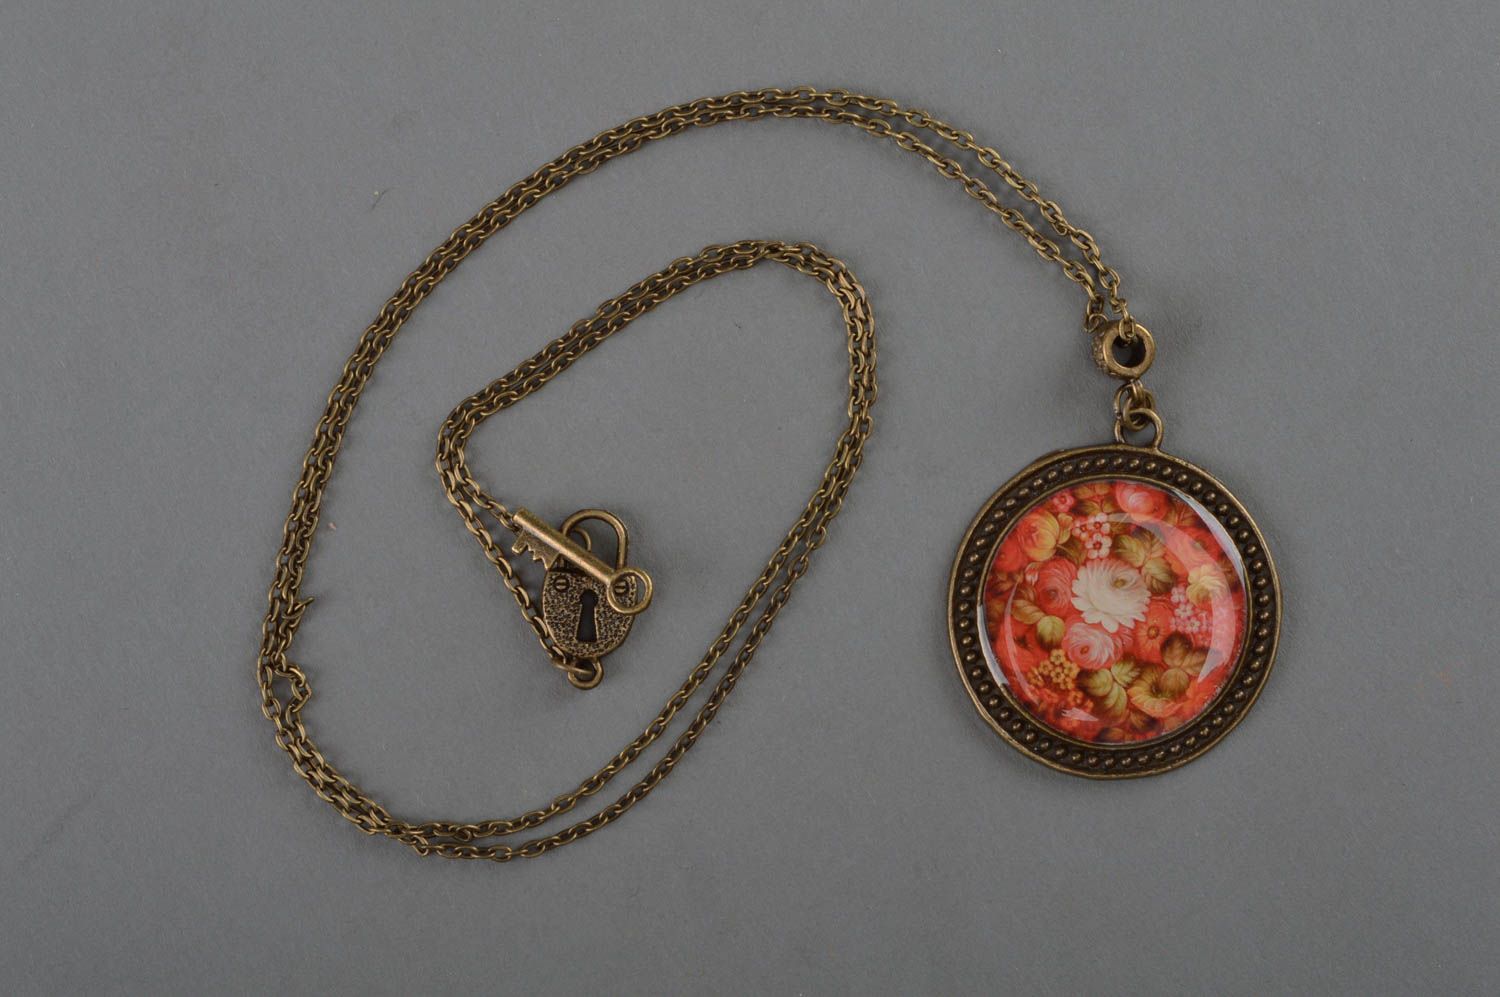 Handmade round decoupage pendant necklace with floral image in jewelry resin photo 1